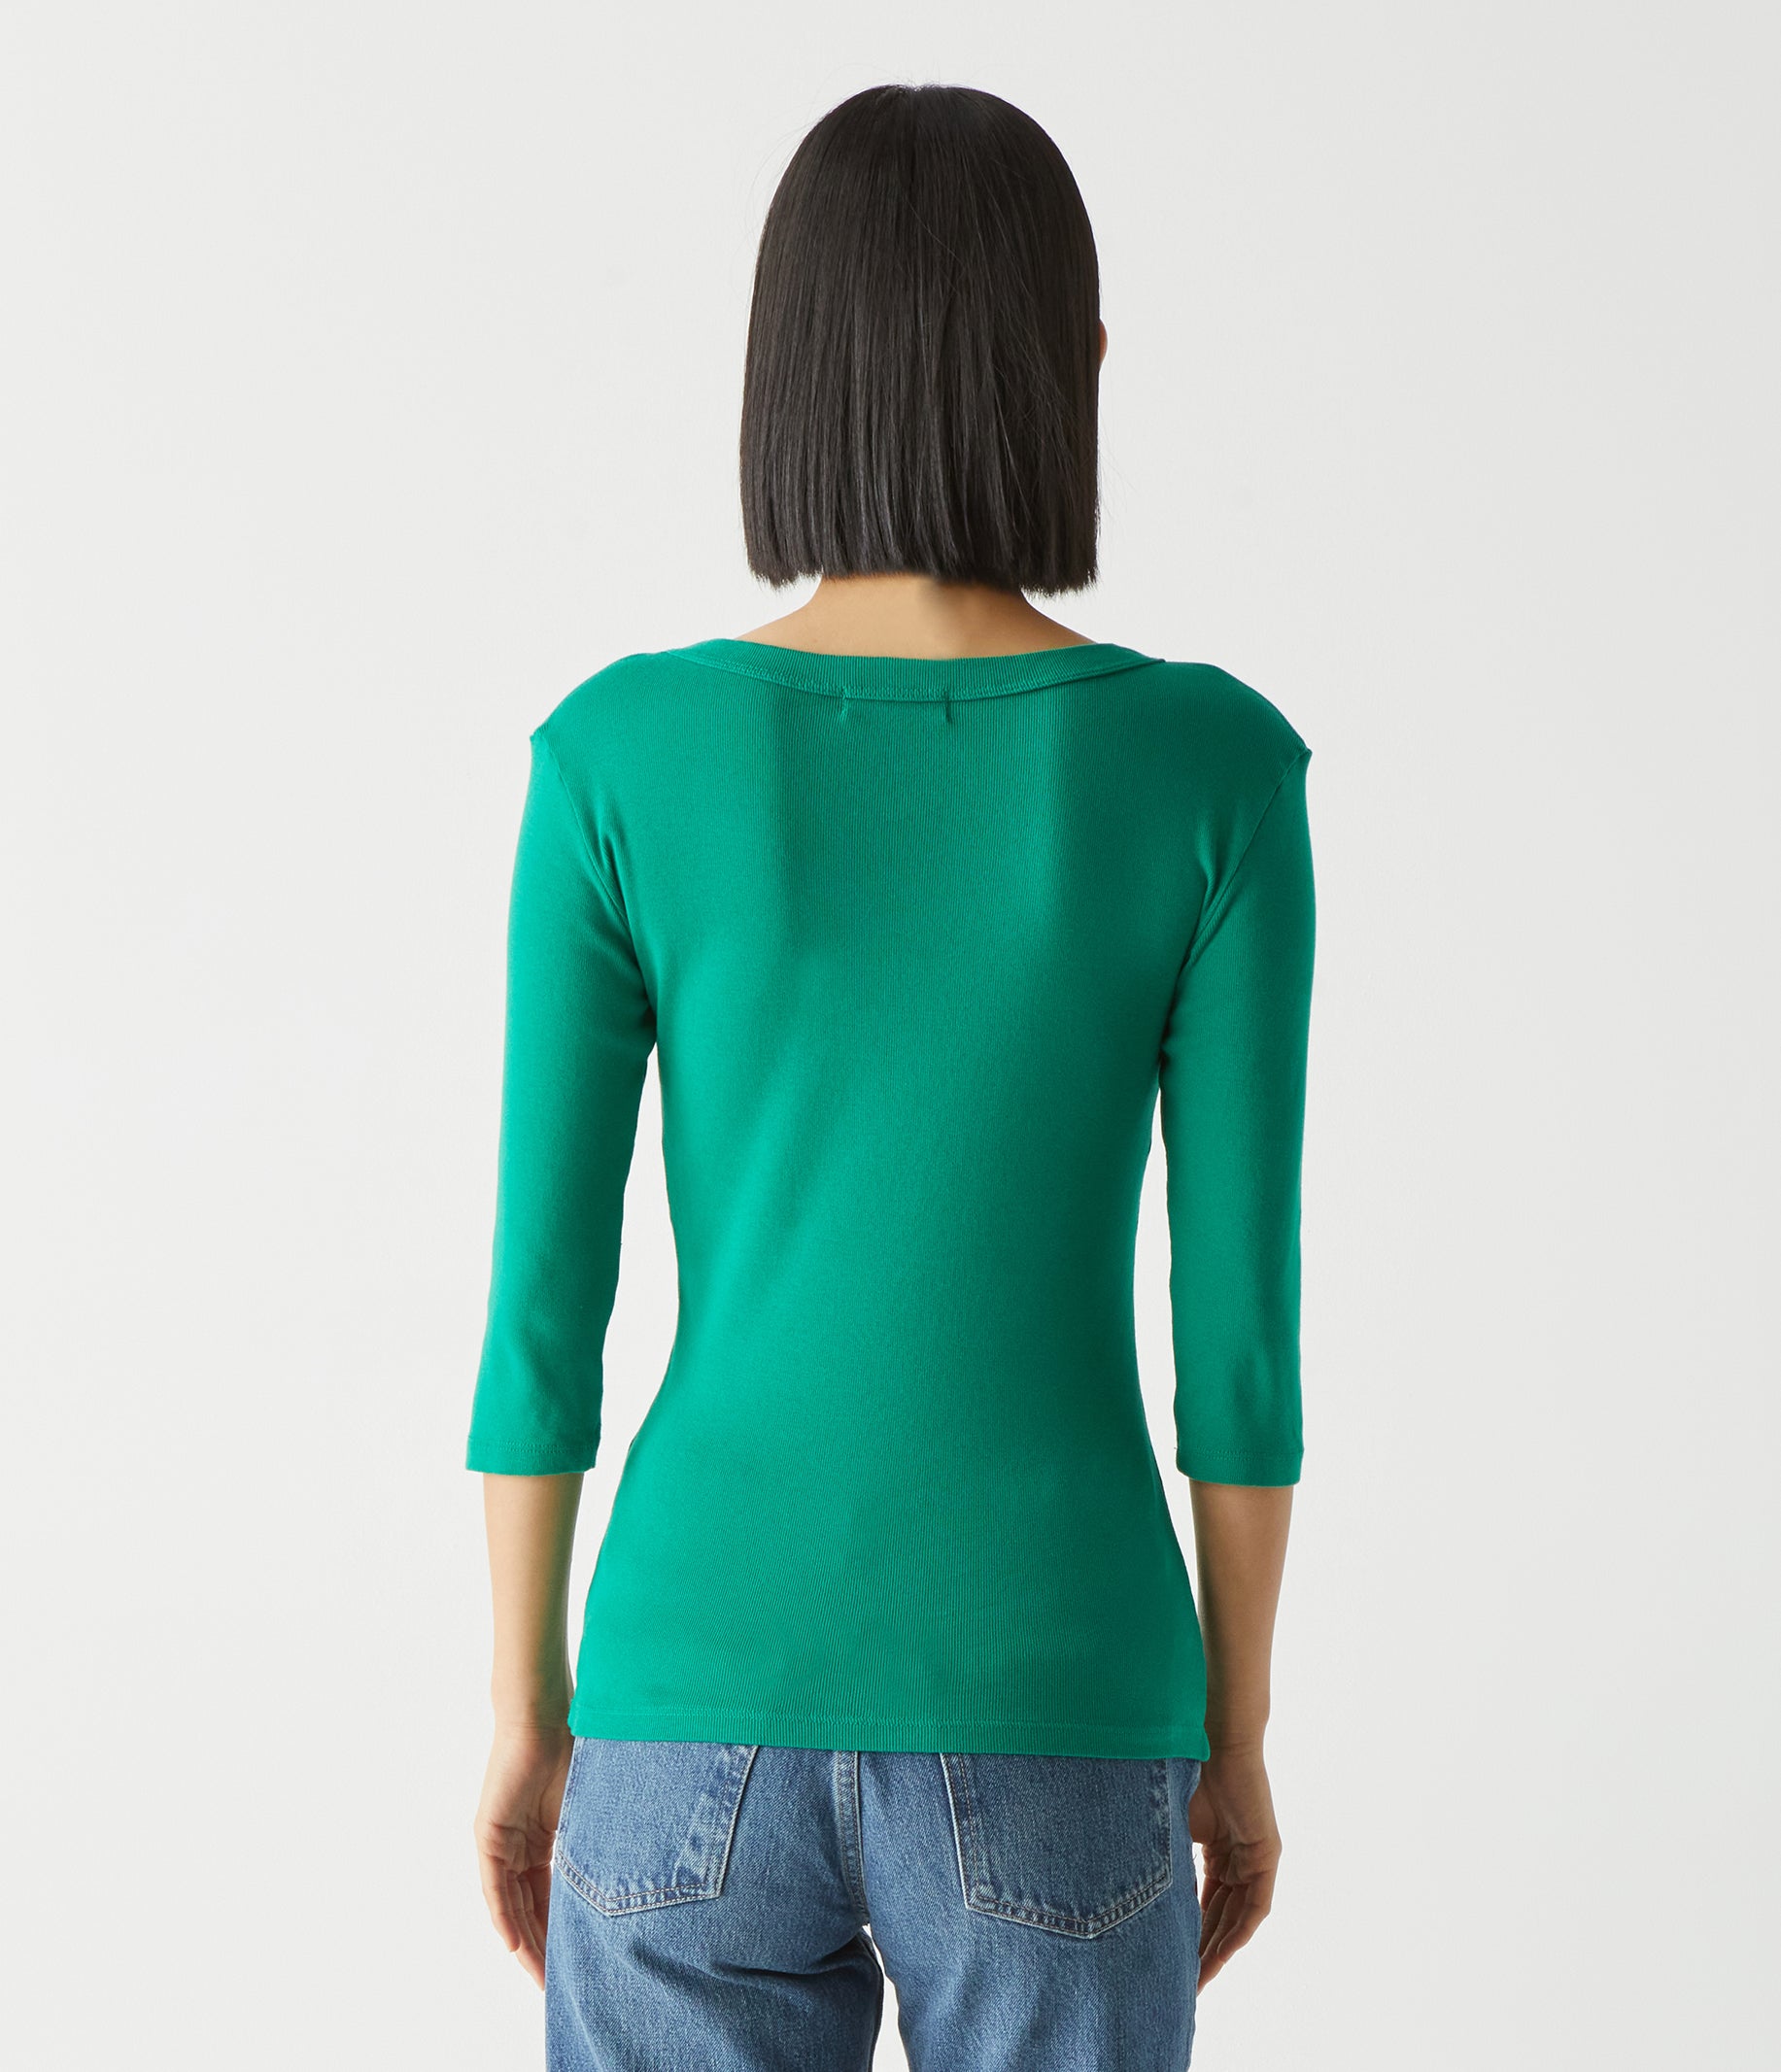 Long and 3/4 Sleeve Tops